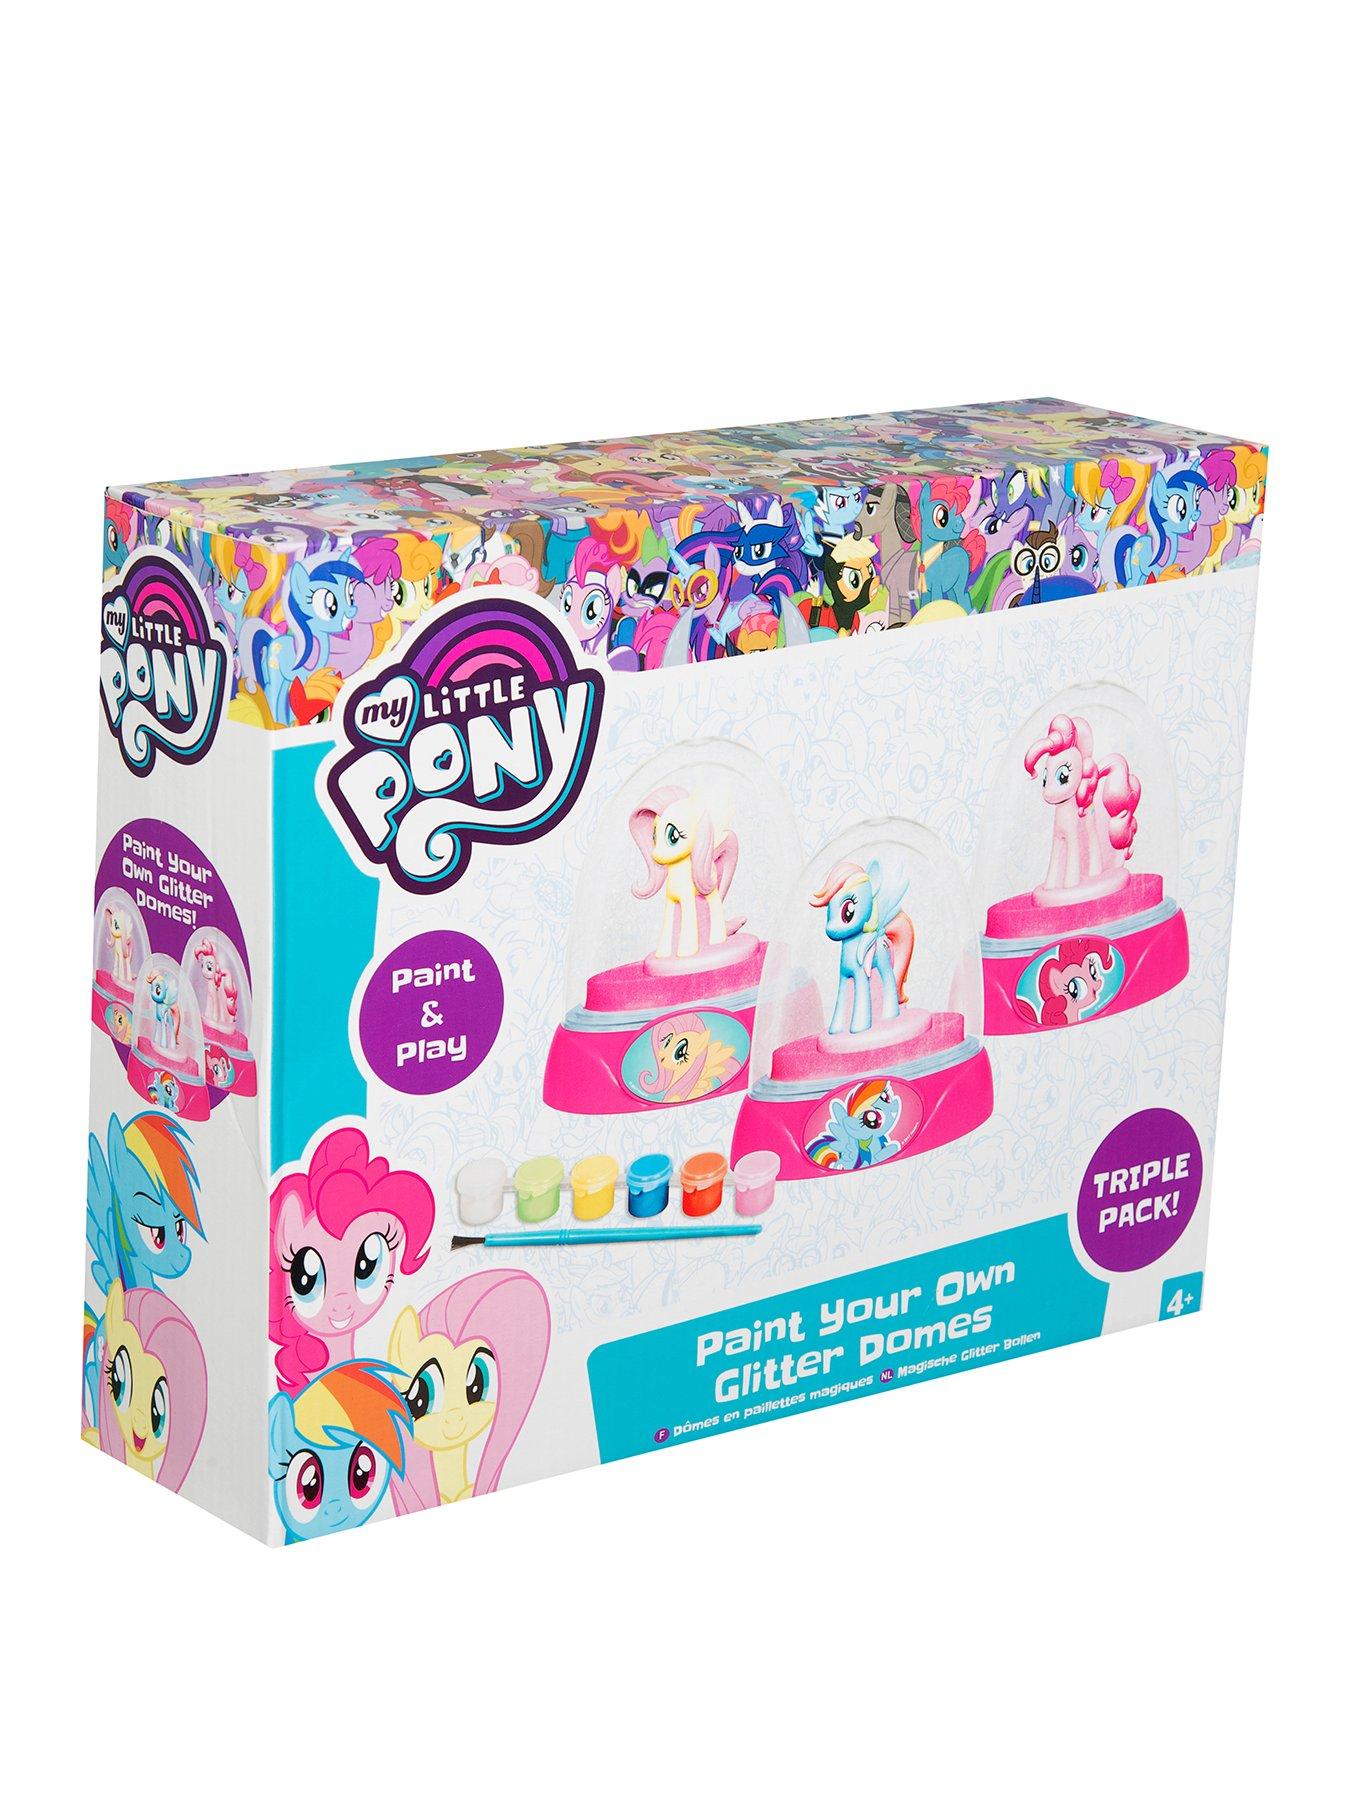 my little pony paint your own figure